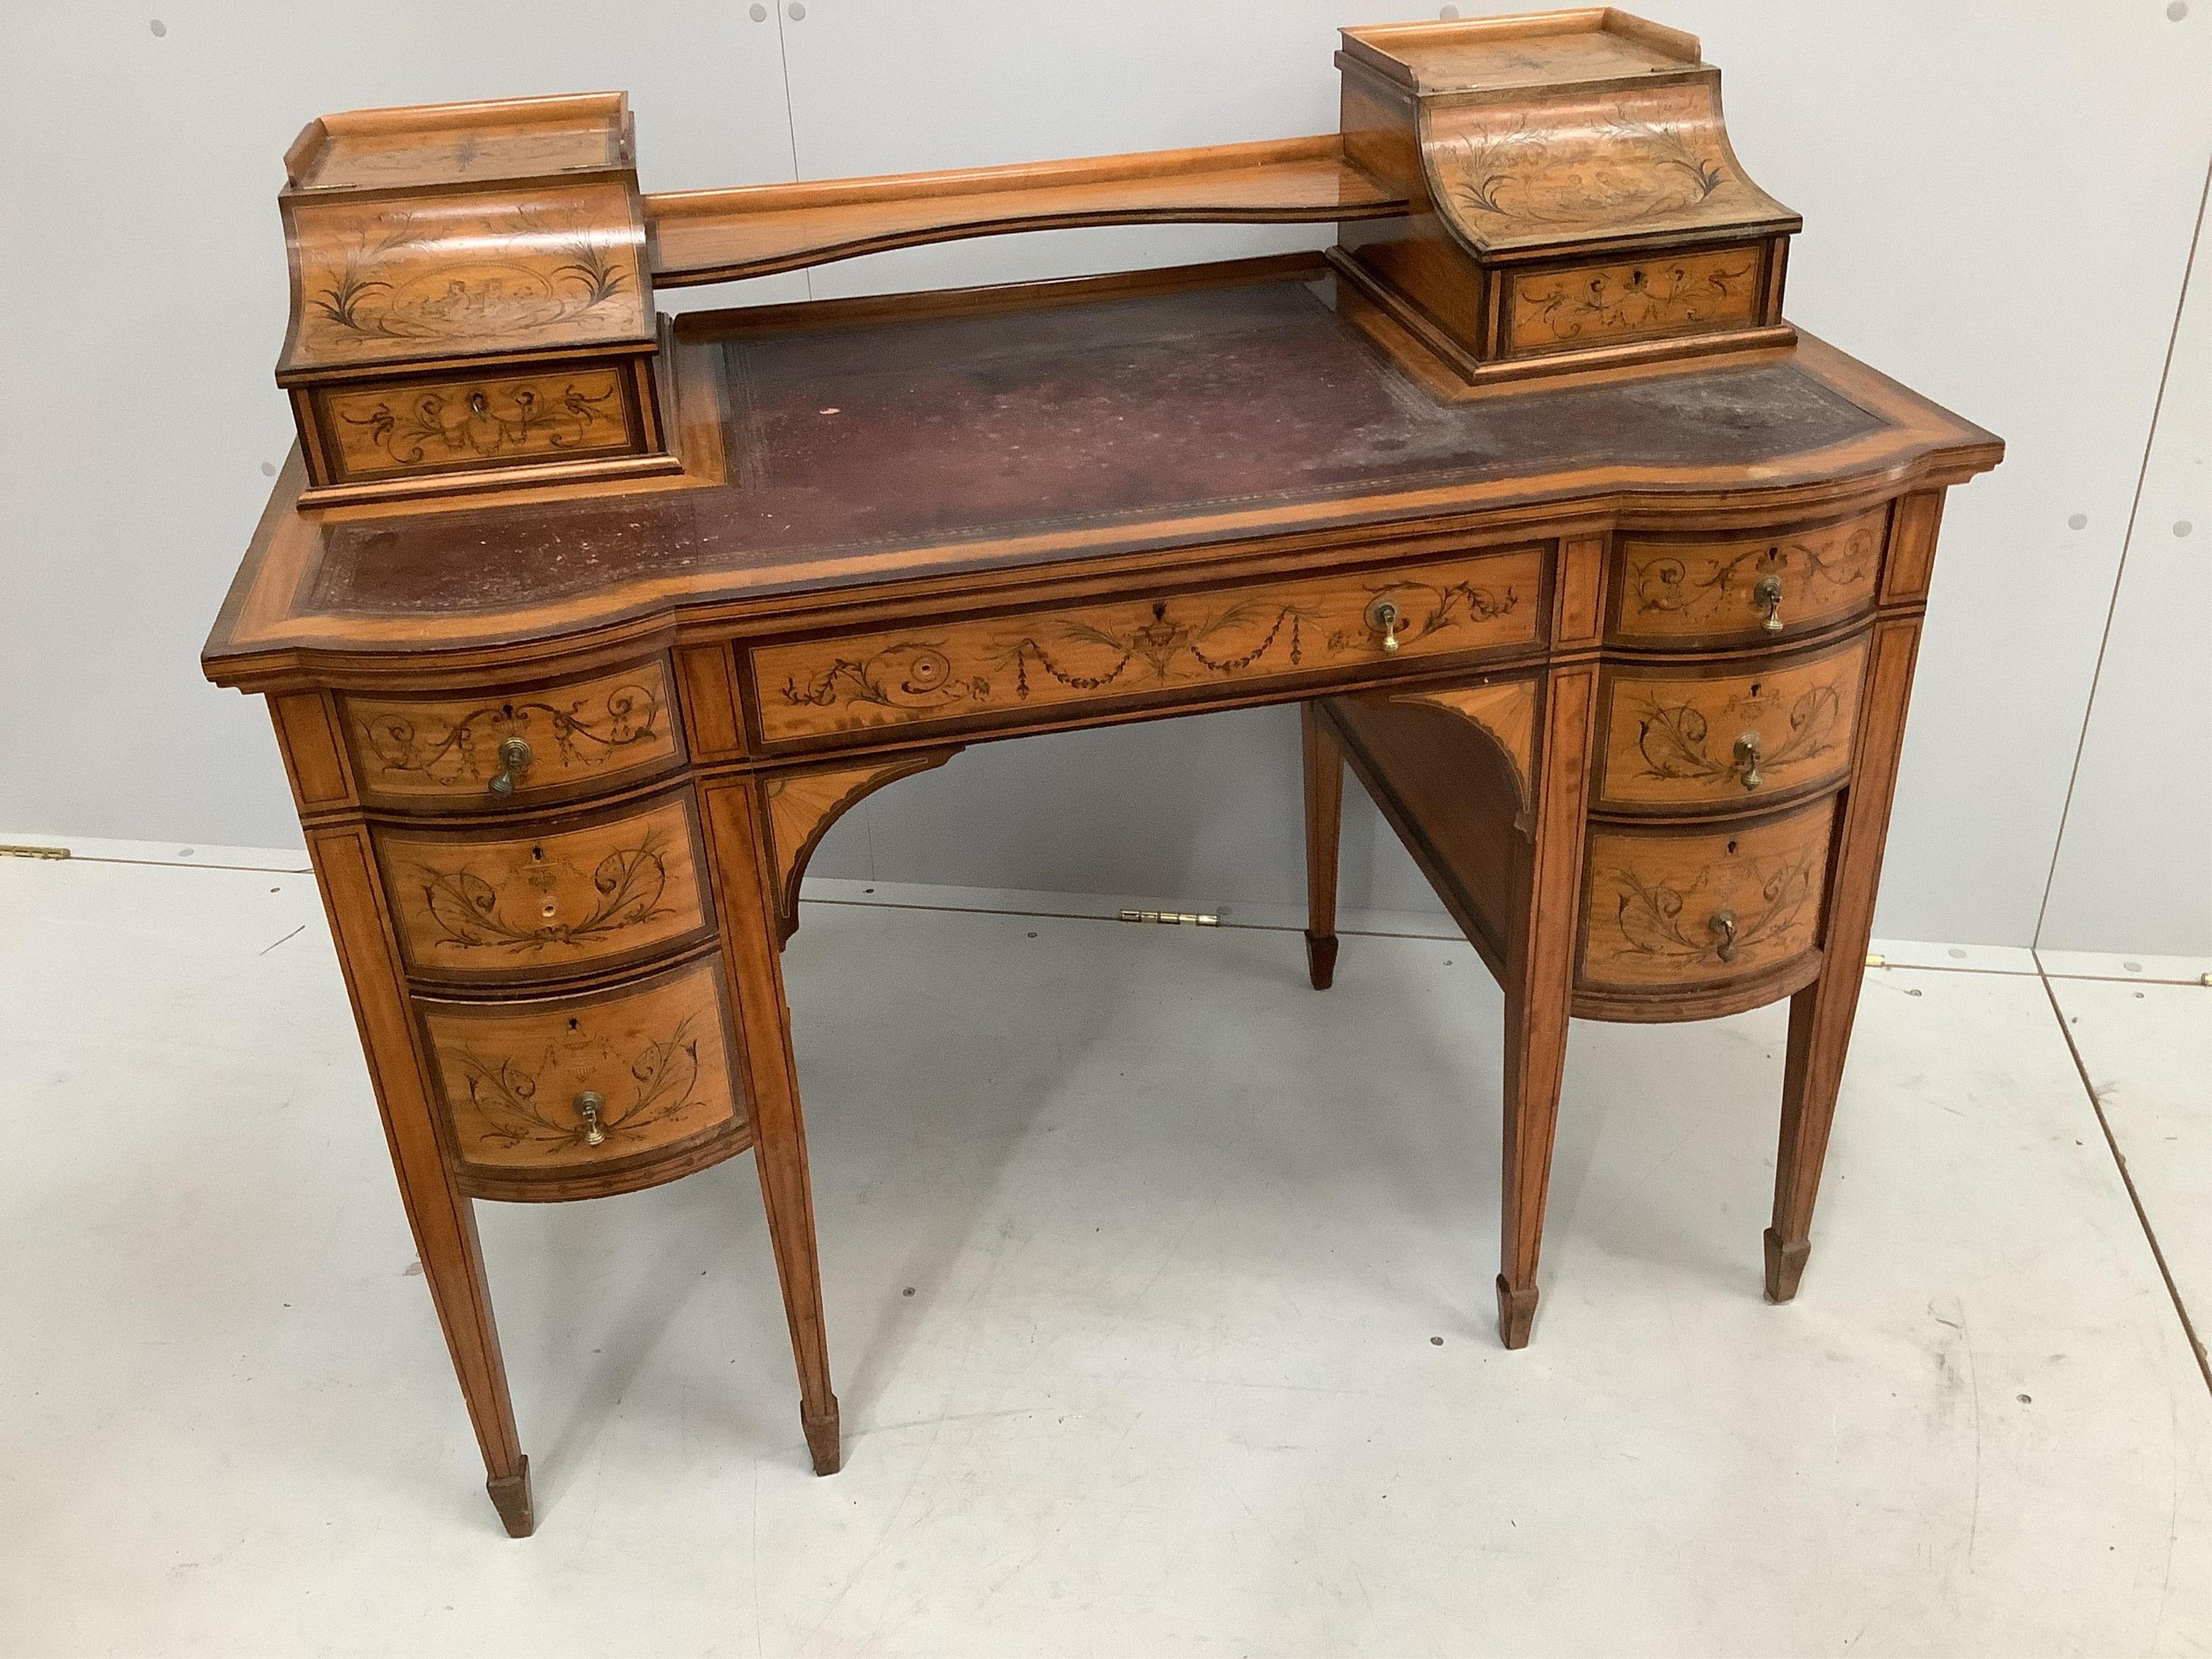 An Edwardian marquetry inlaid Sheraton Revival satinwood kneehole desk, width 106cm, depth 60cm, height 90cm